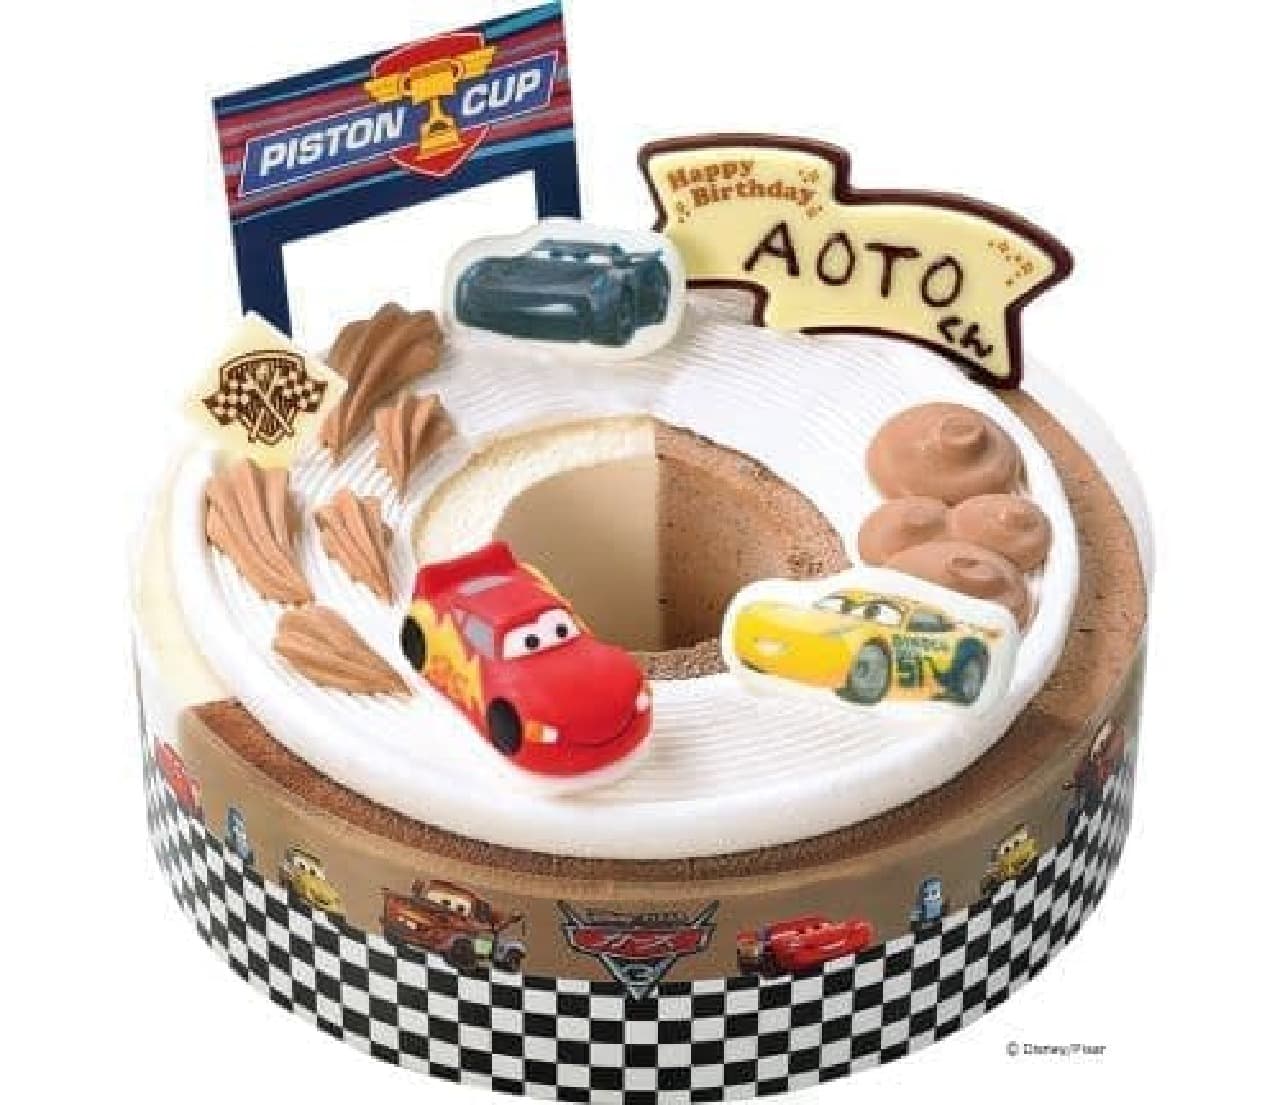 "Cars'McQueen' & Friends" is an ice cream cake that expresses the world view of the movie "Cars"